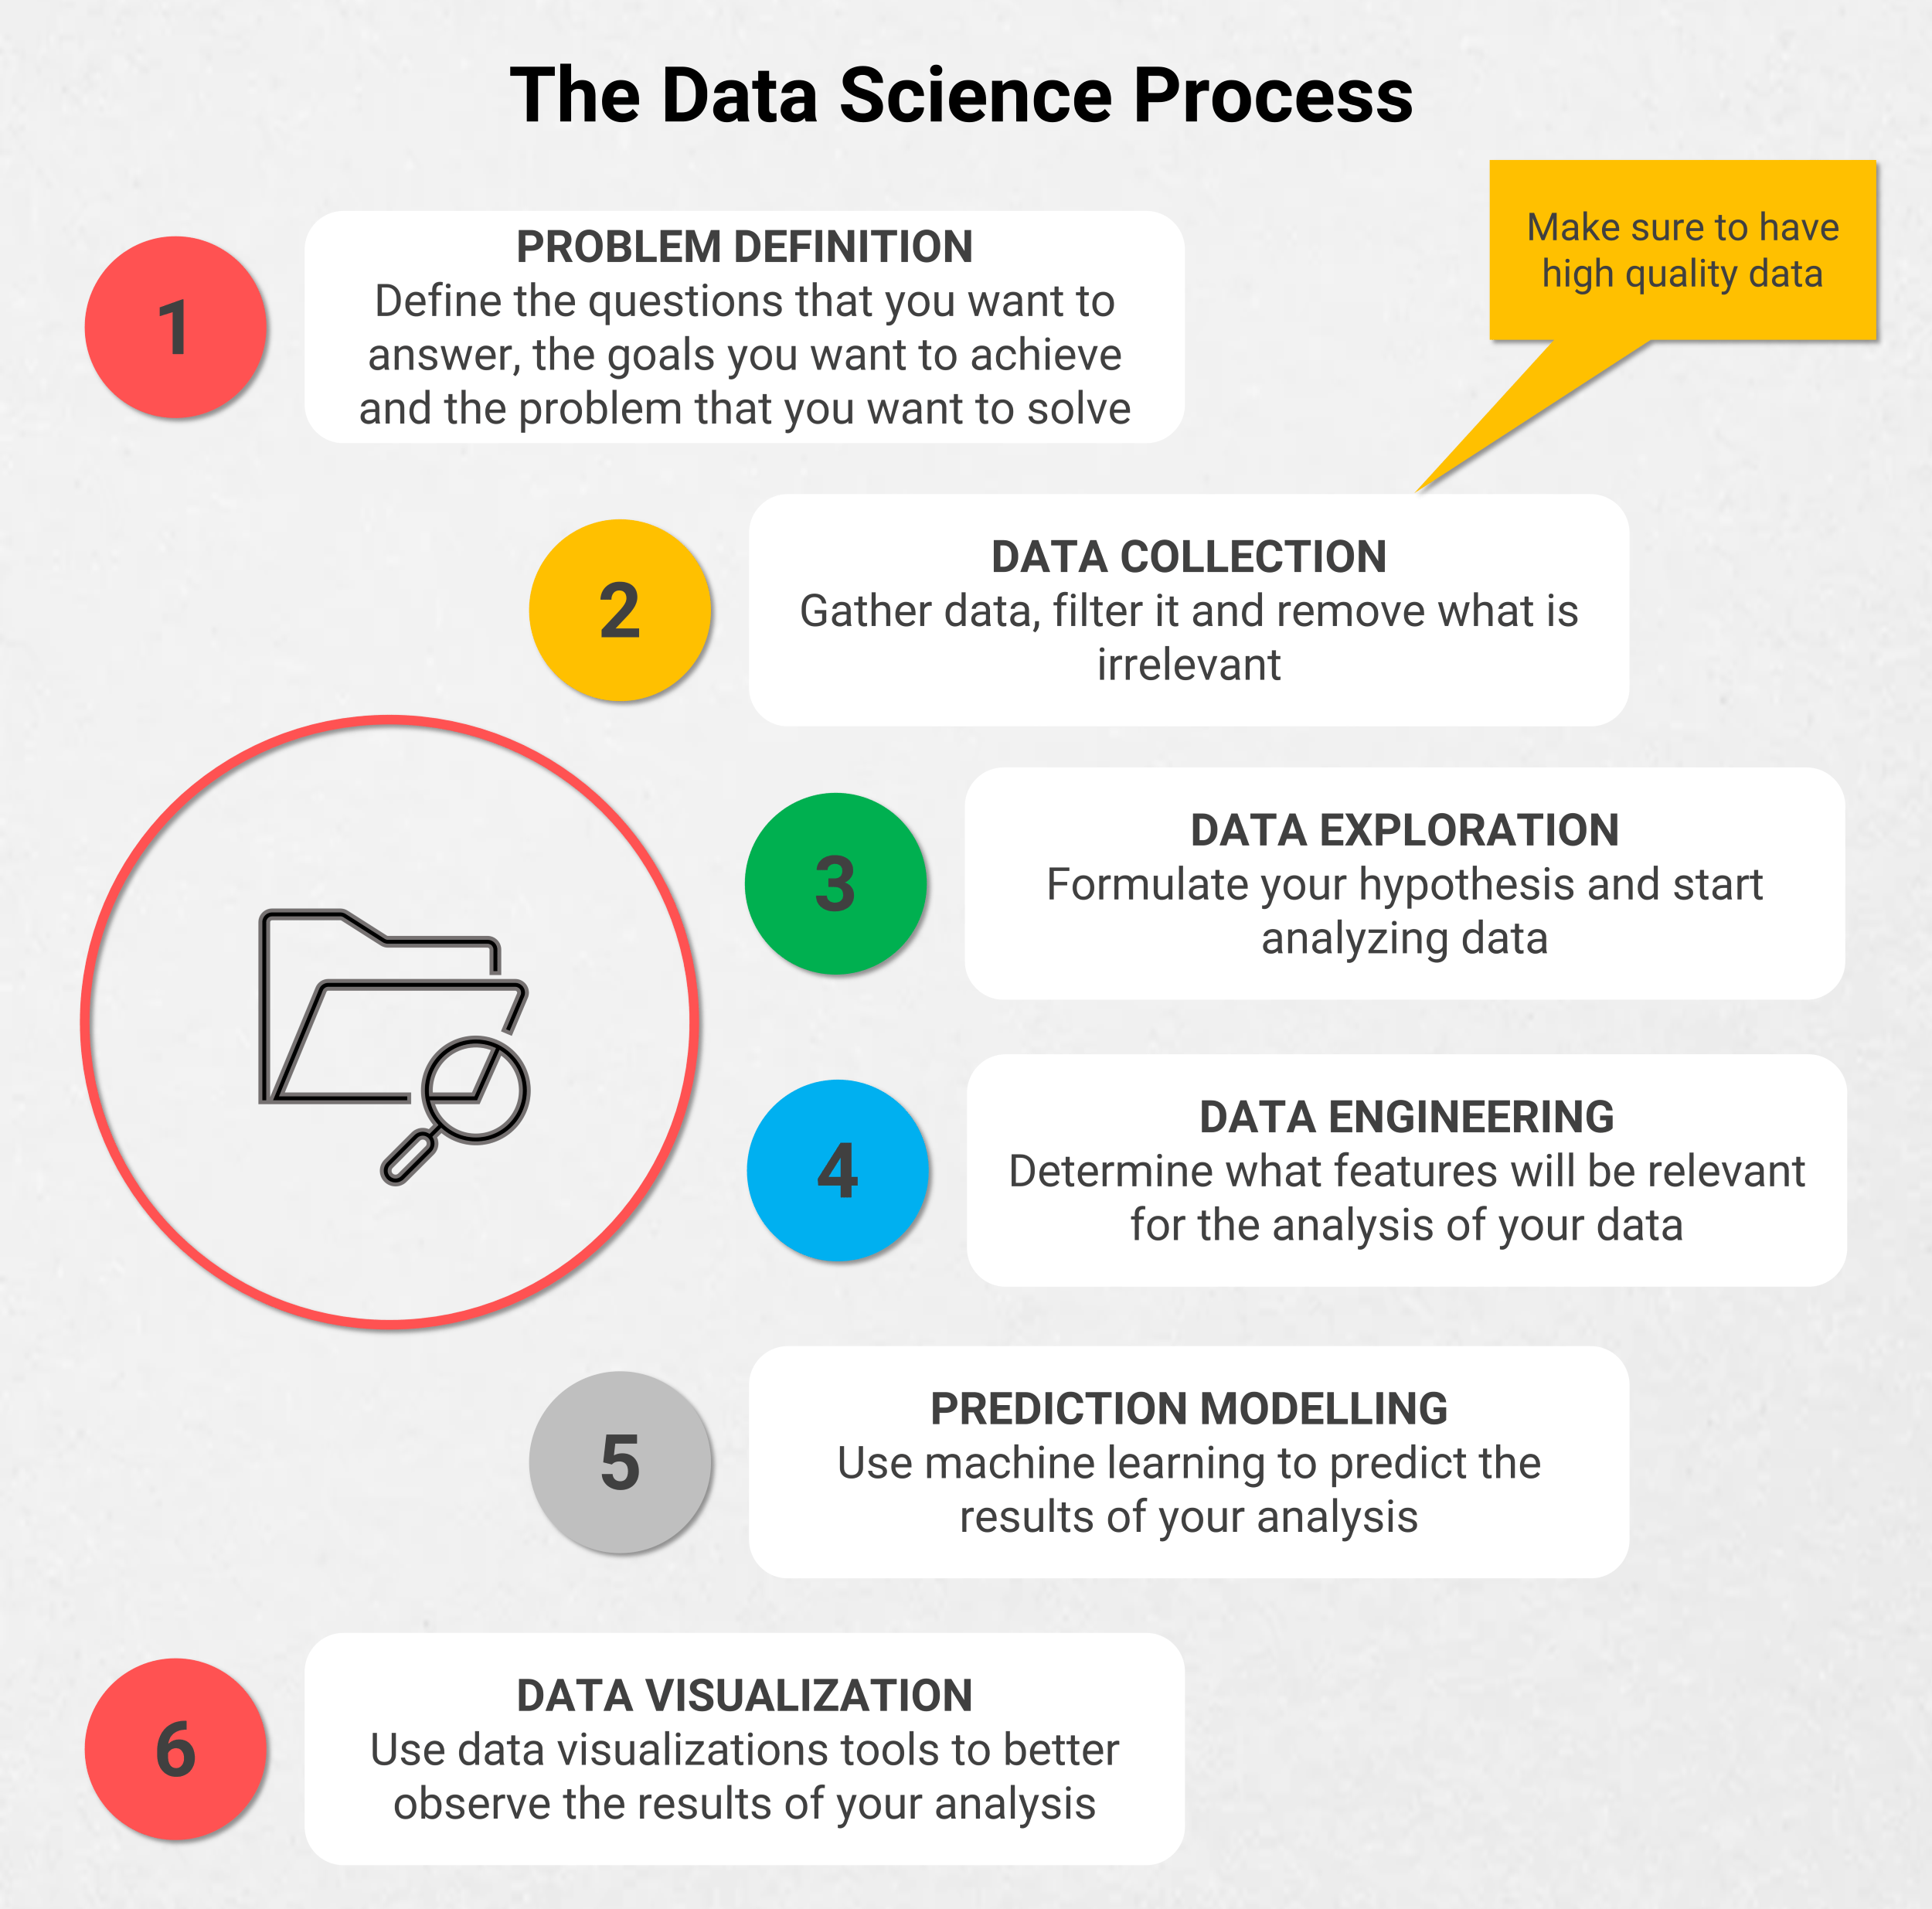 The data science process